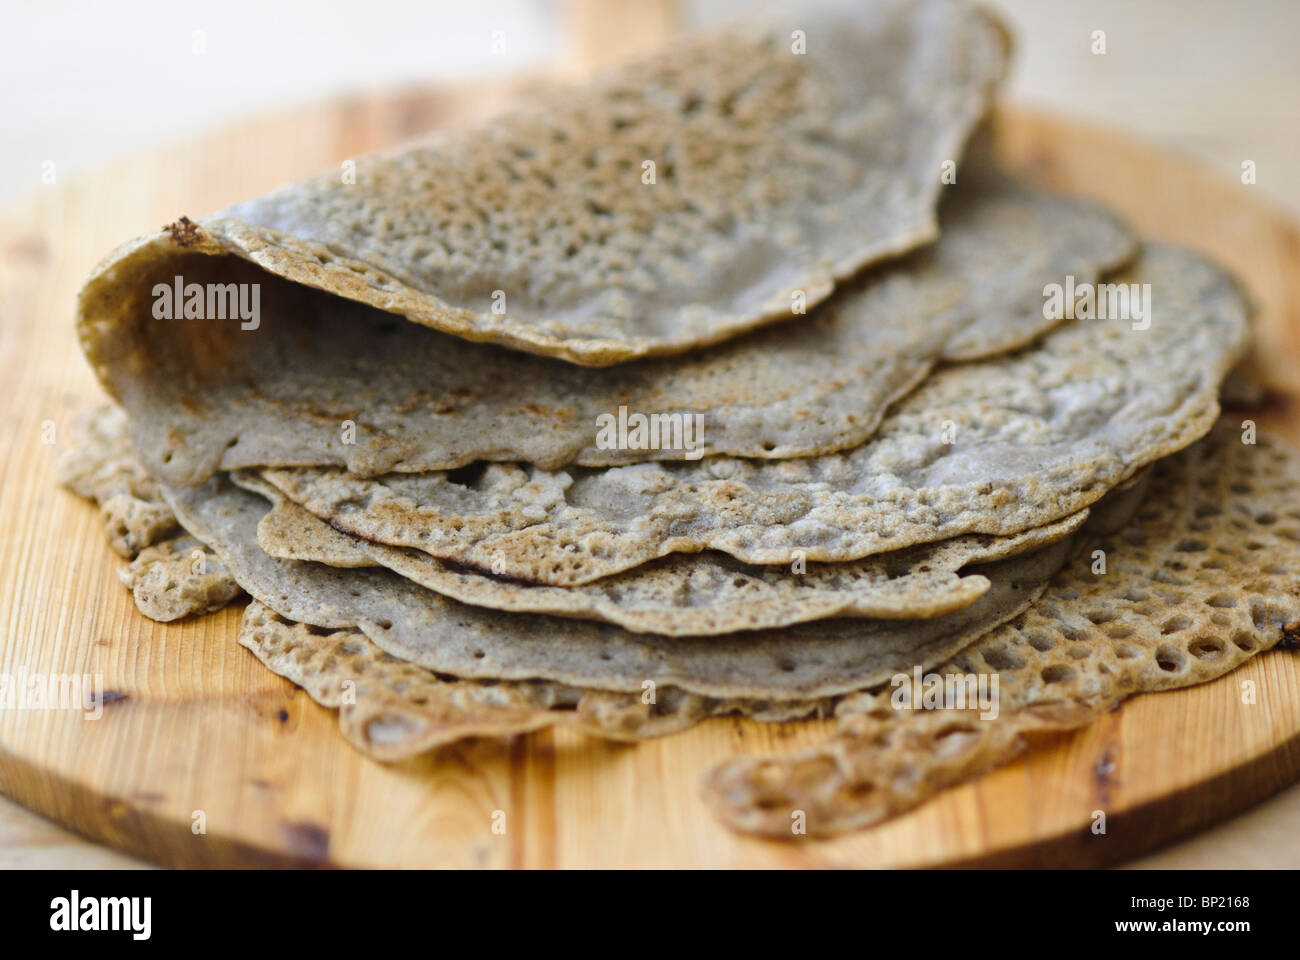 Bread wraps made of buckwheat flour, salt, olive oil and water. Gluten free. Stock Photo